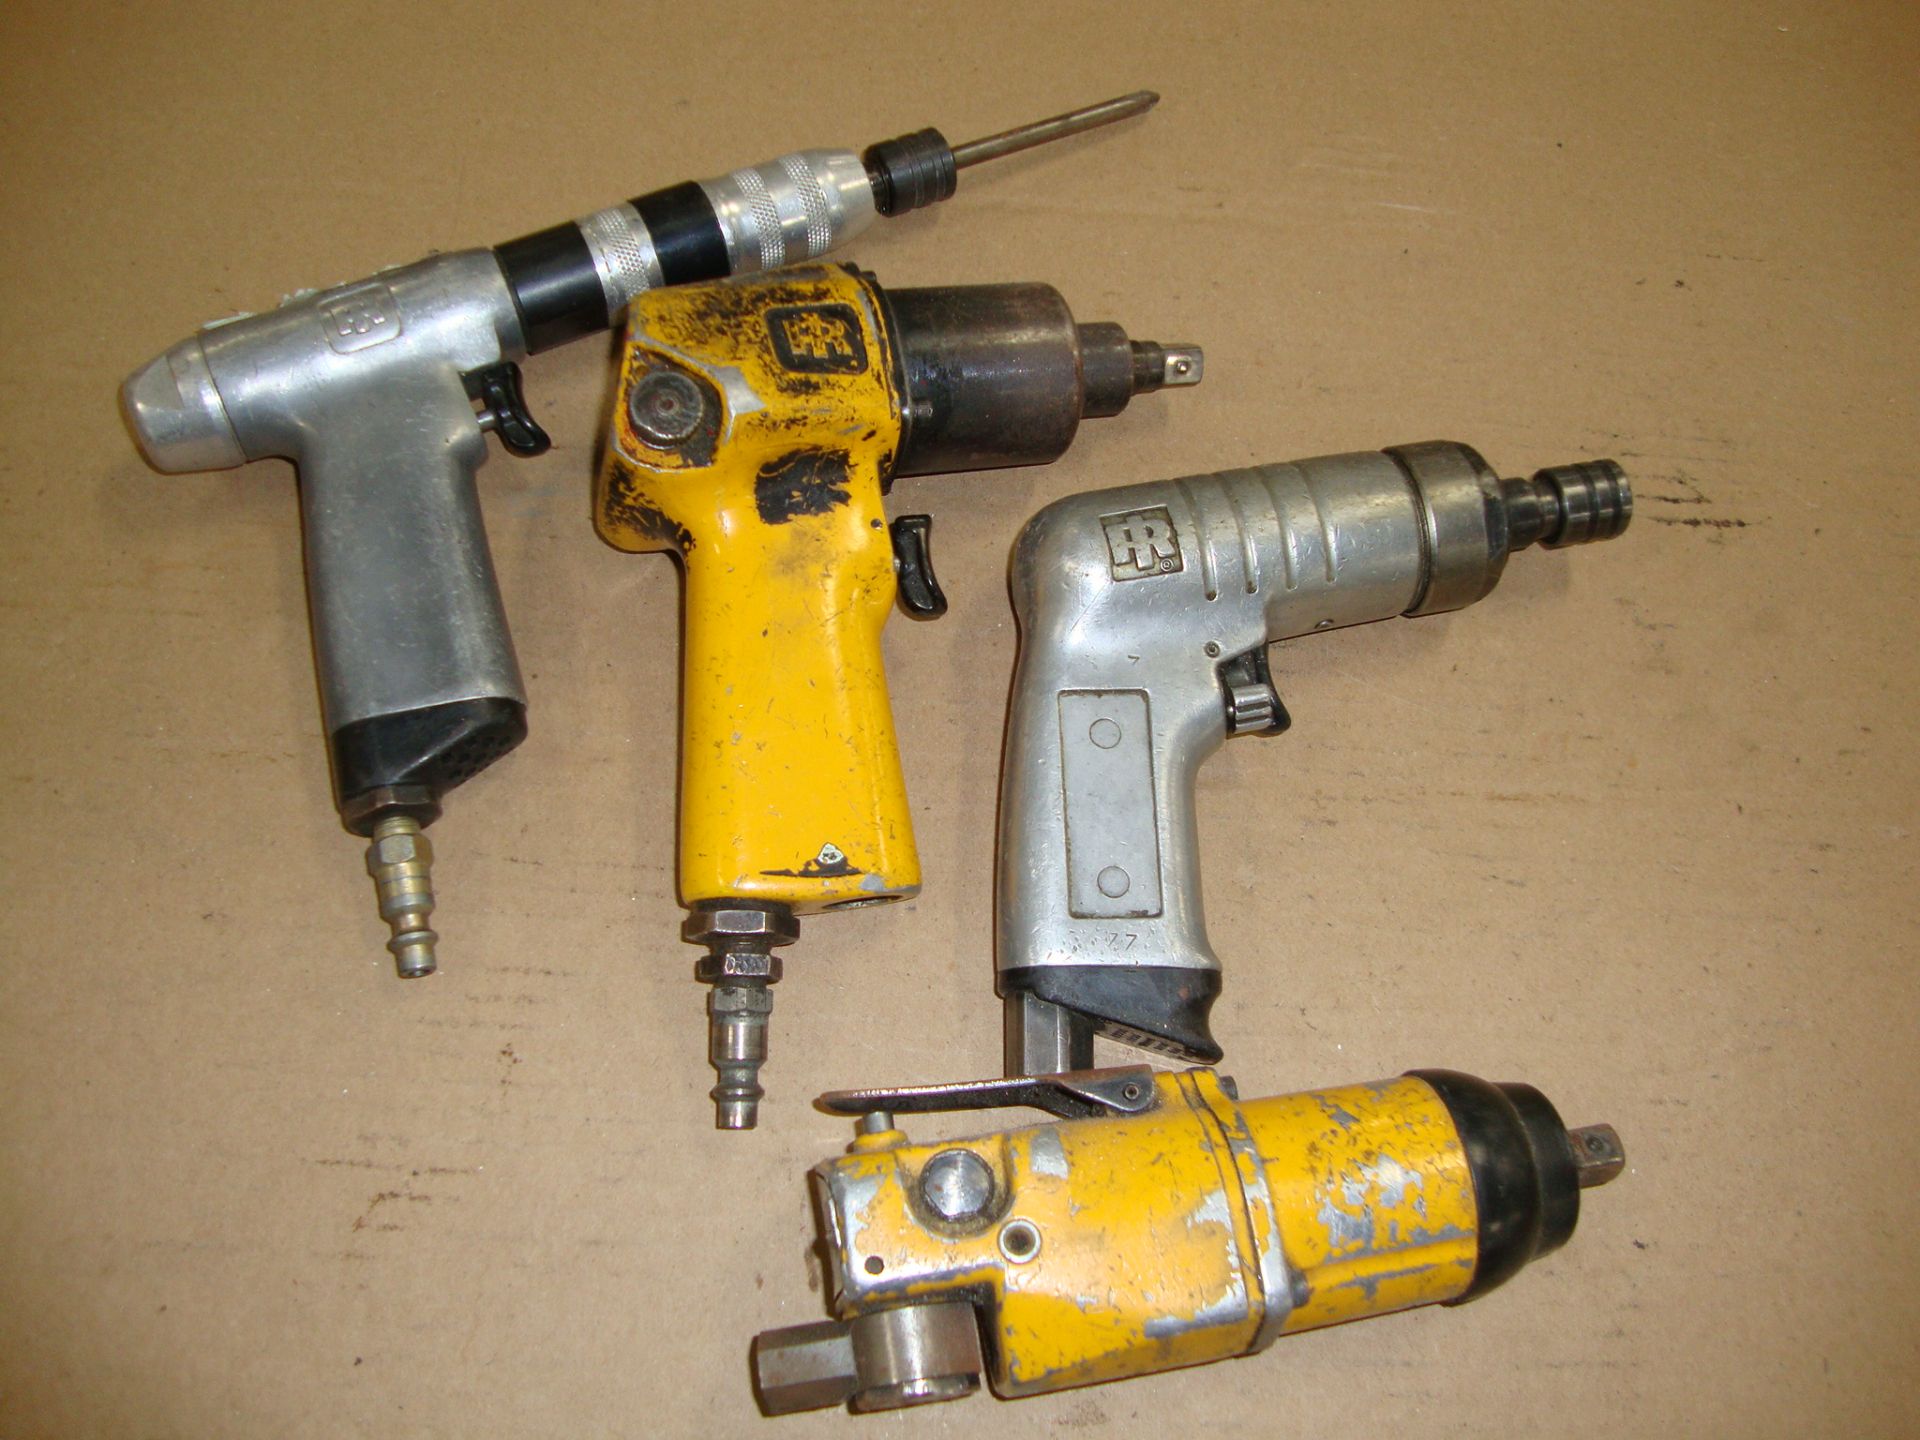 Lot of 4 Pneumatic Drills and Drivers